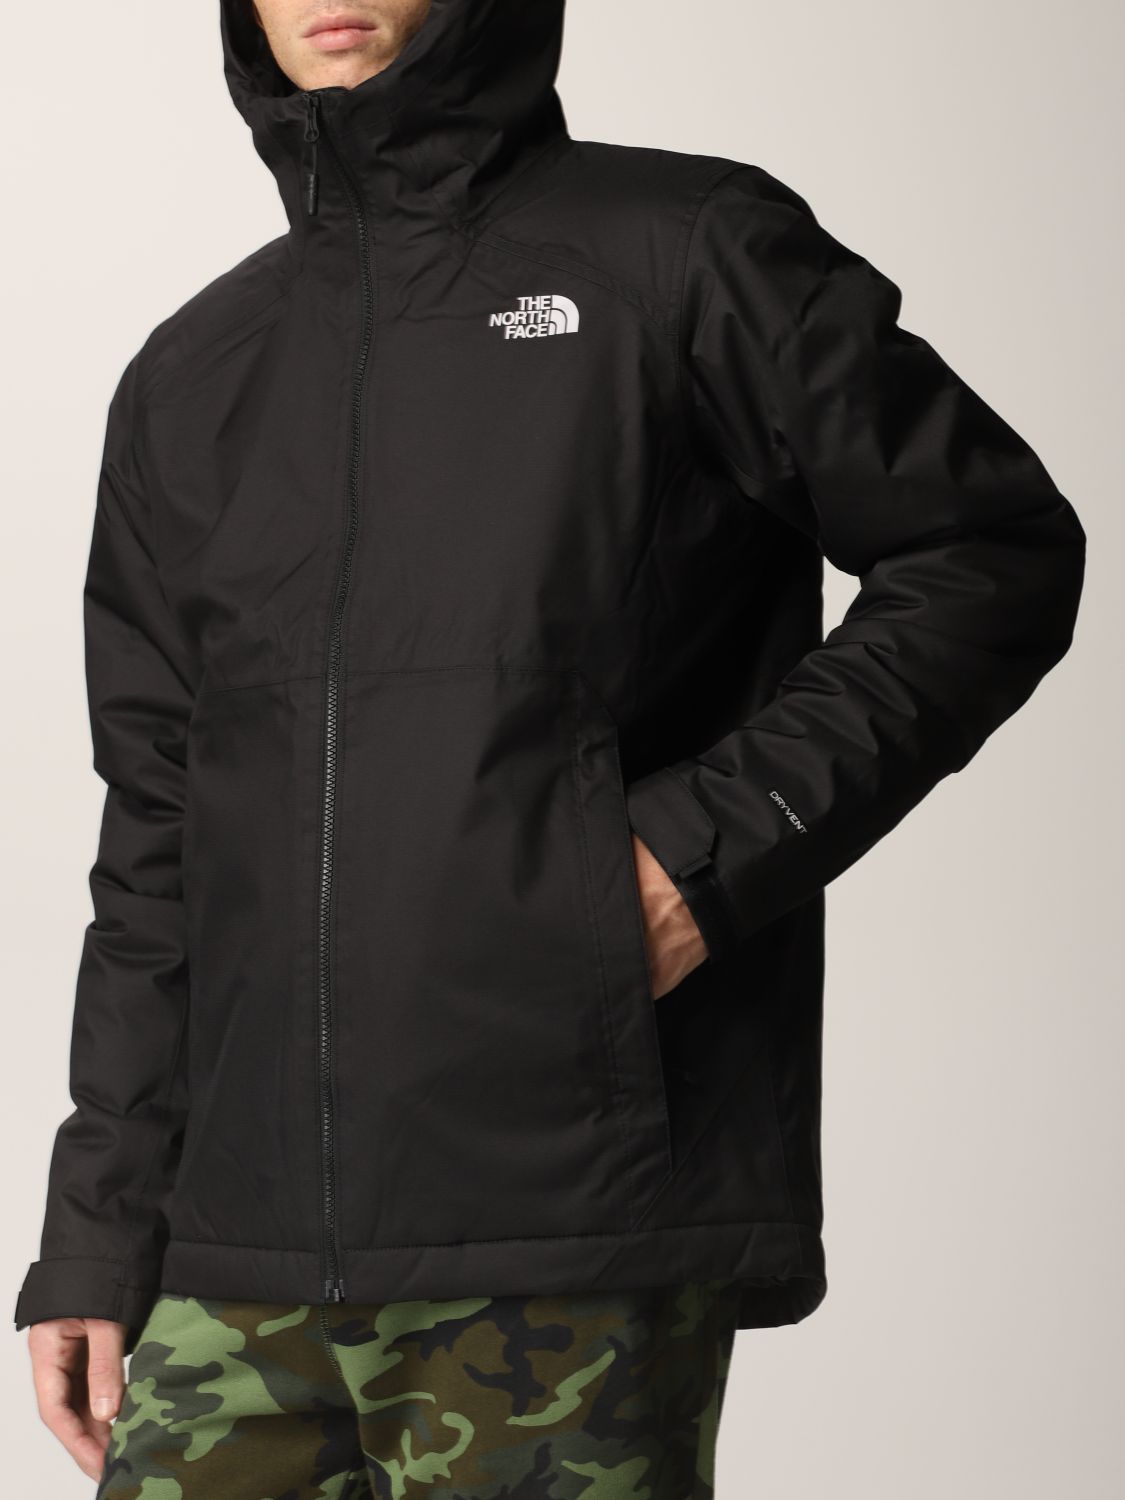 THE NORTH FACE: jacket for man - Black  The North Face jacket NF0A3YFIJK31  online at